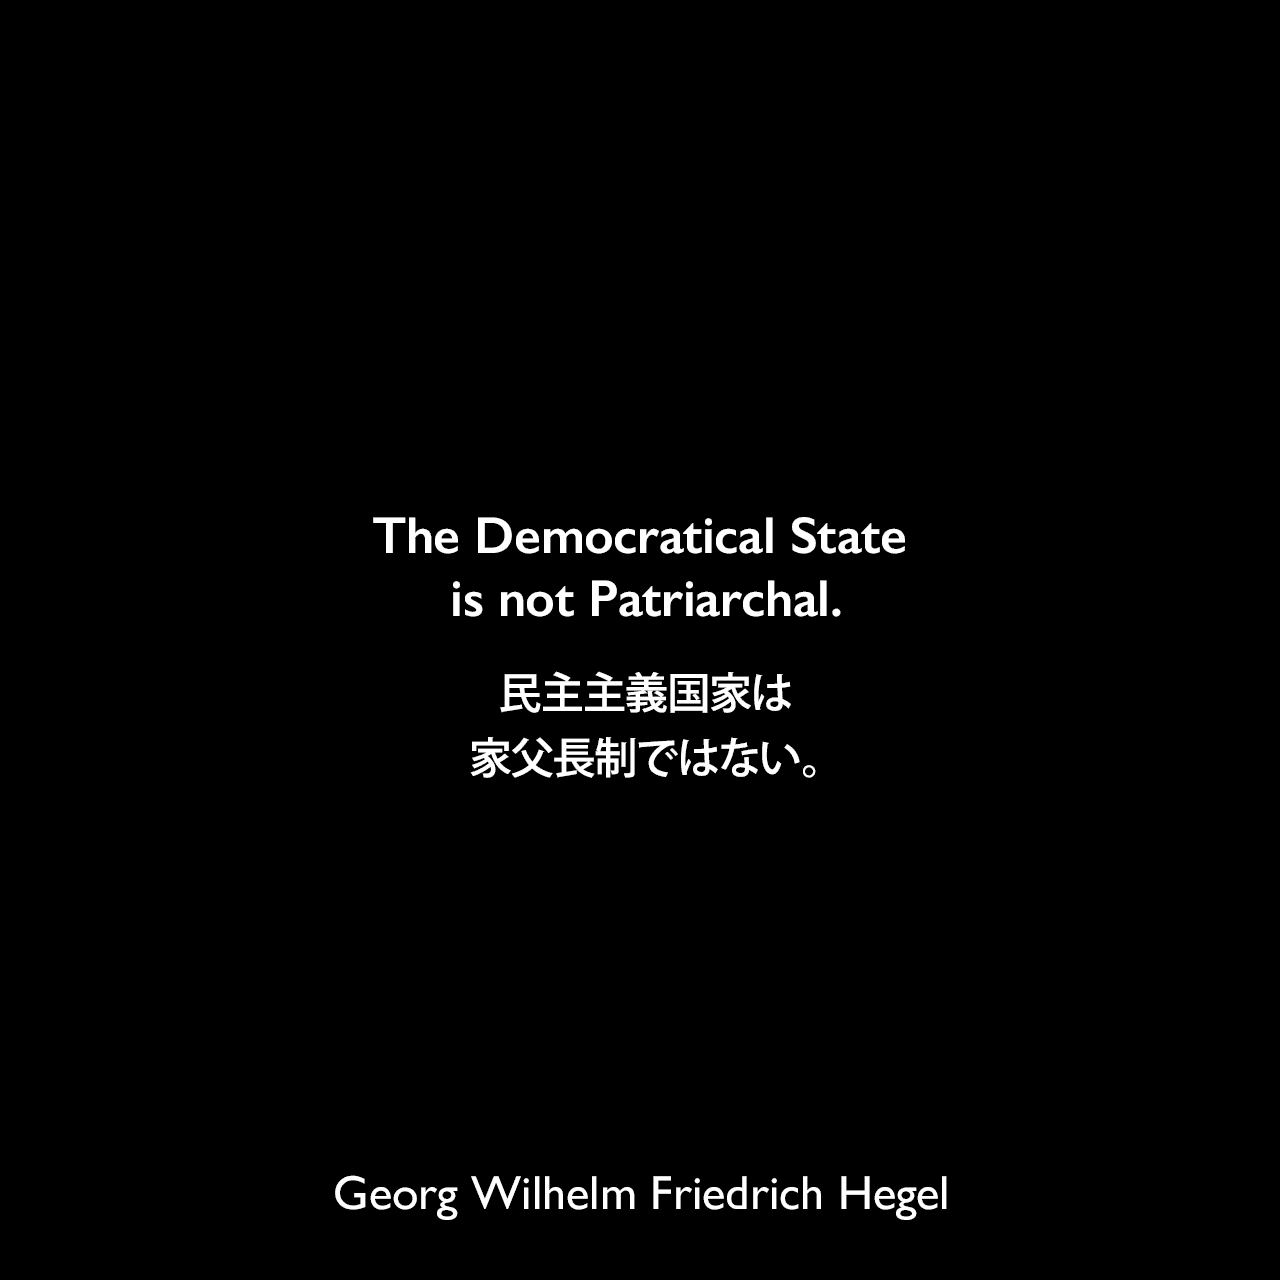 The Democratical State is not Patriarchal.民主主義国家は家父長制ではない。- ヘーゲルによる本「Lectures on the Philosophy of History」よりGeorg Wilhelm Friedrich Hegel